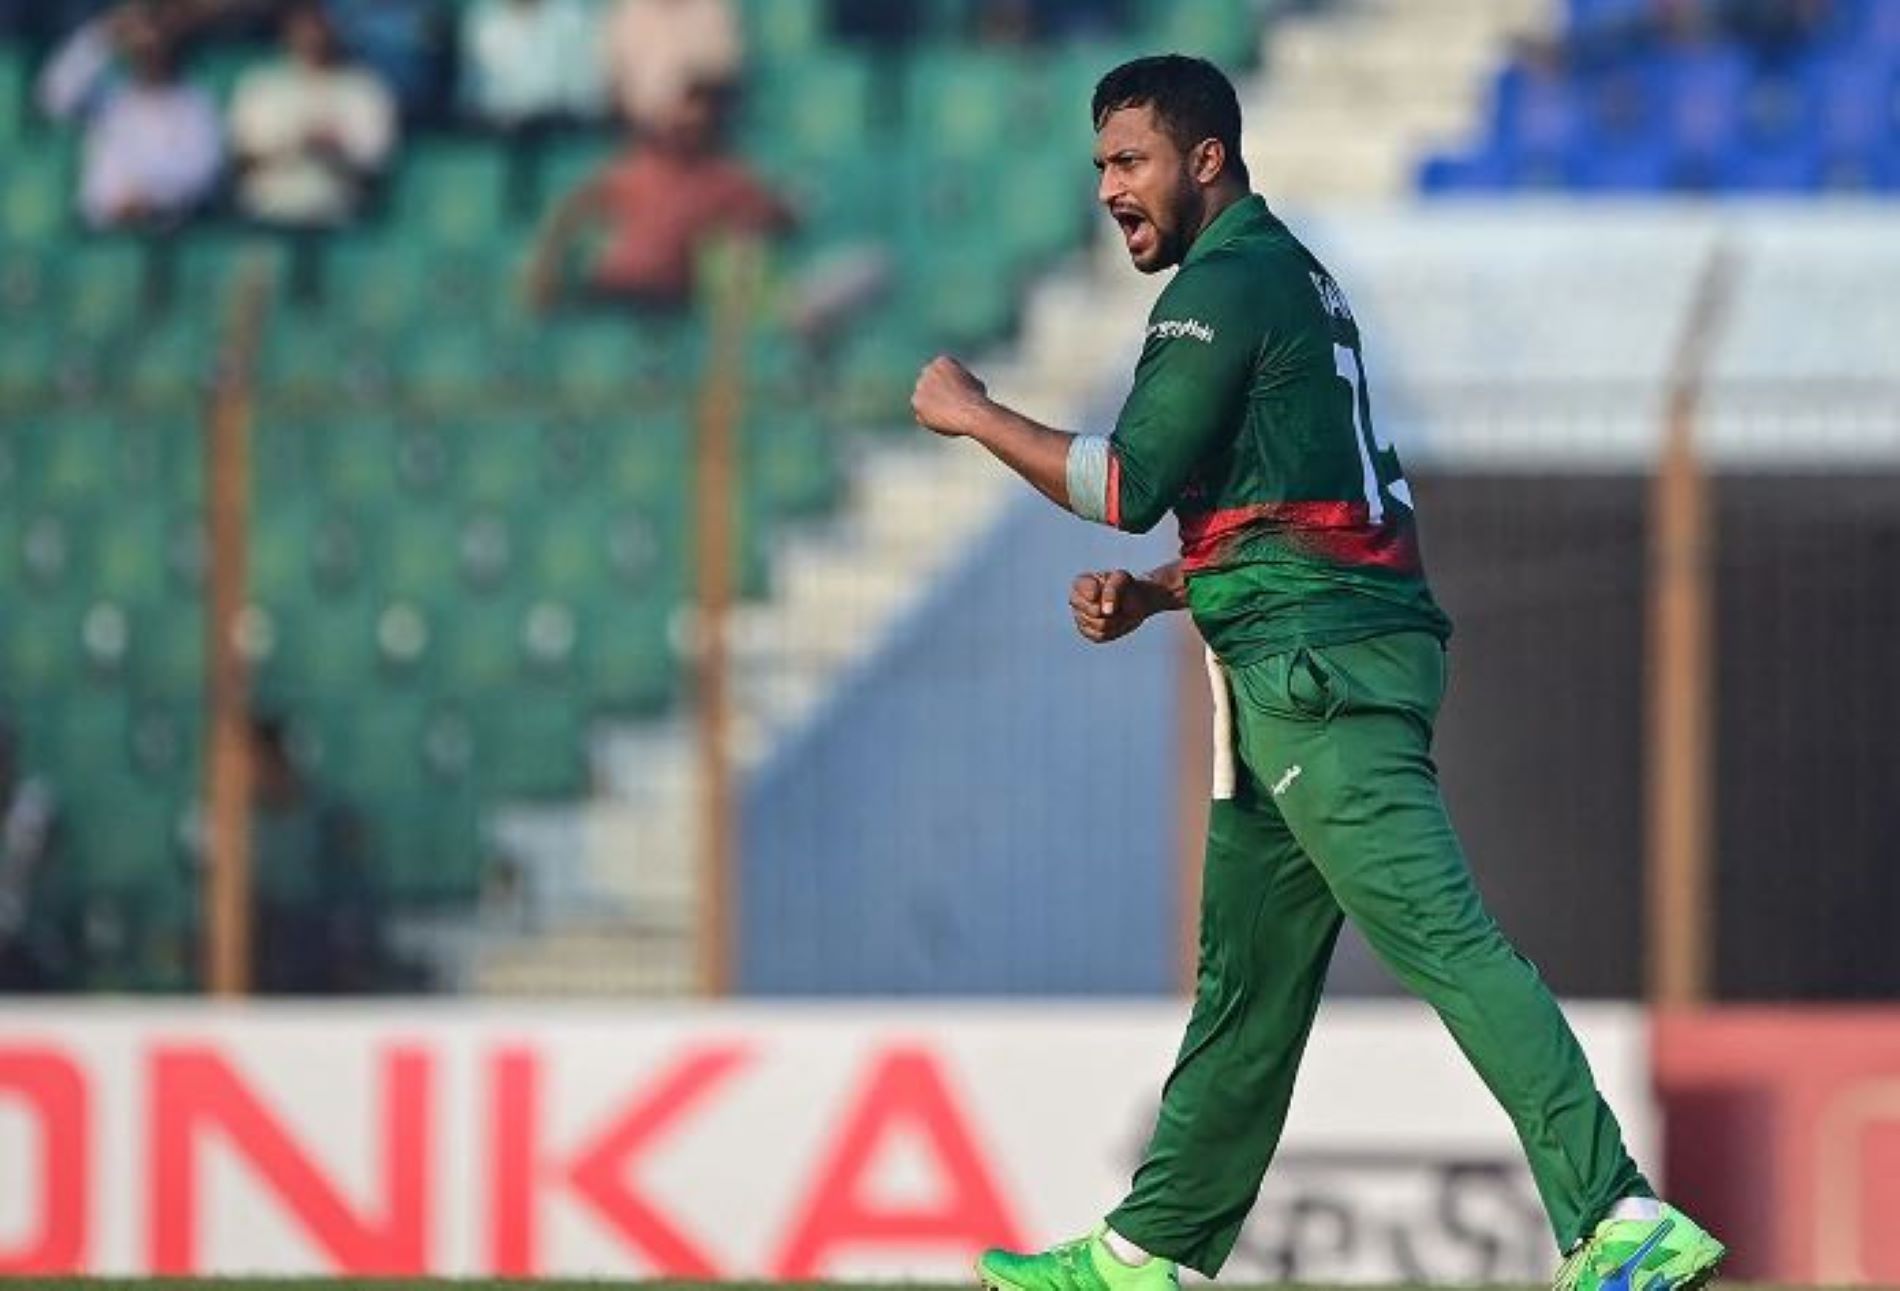 Shakib Al Hasan will be the main threat for Team India in the Bangladesh game.